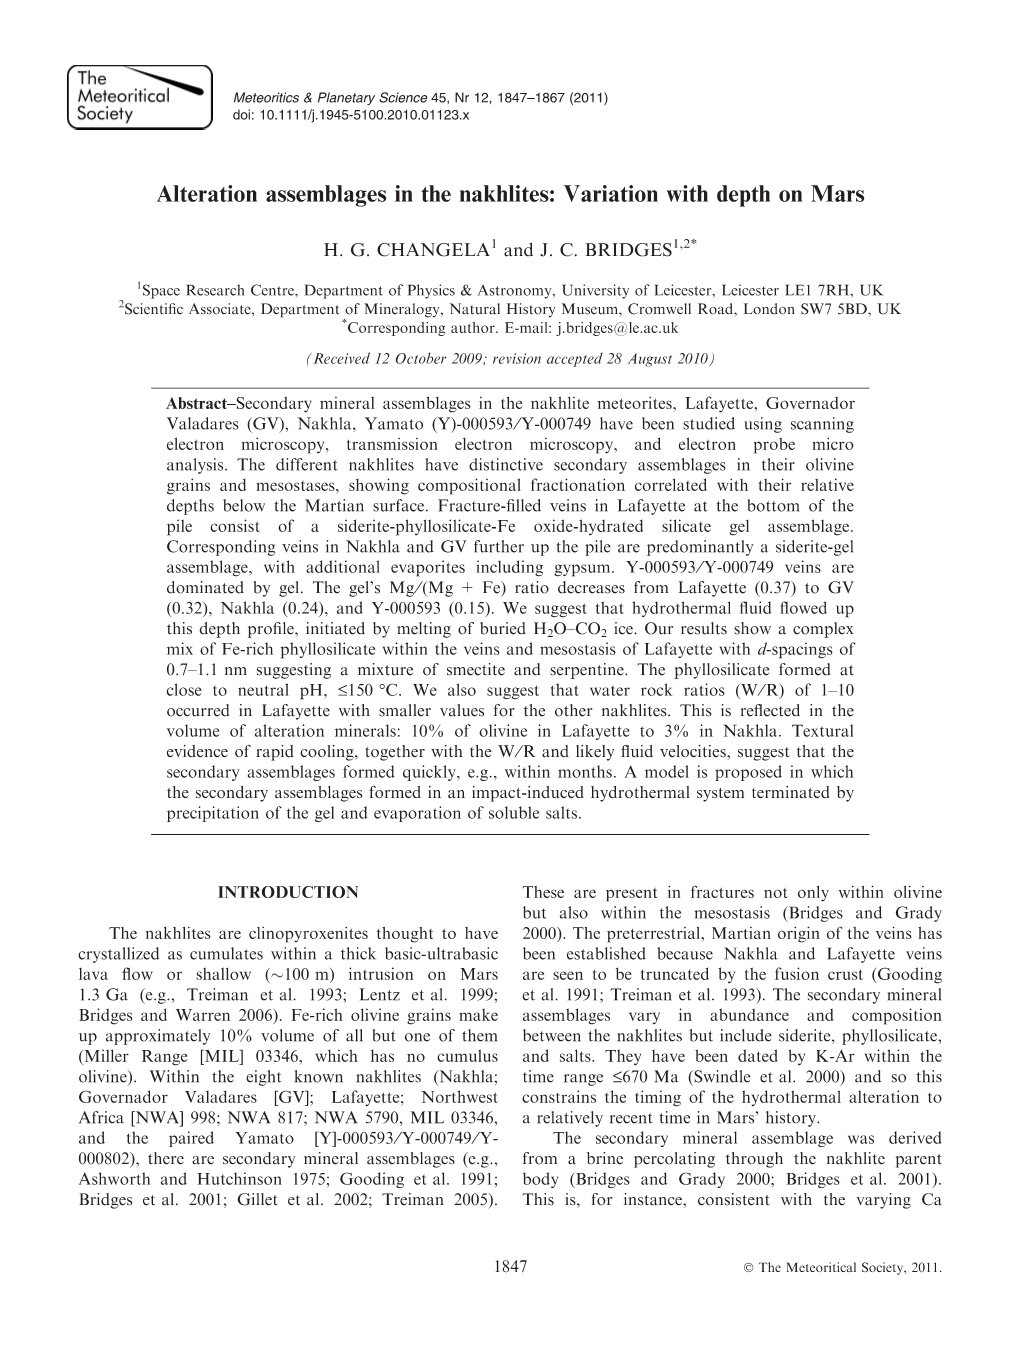 Alteration Assemblages in the Nakhlites: Variation with Depth on Mars